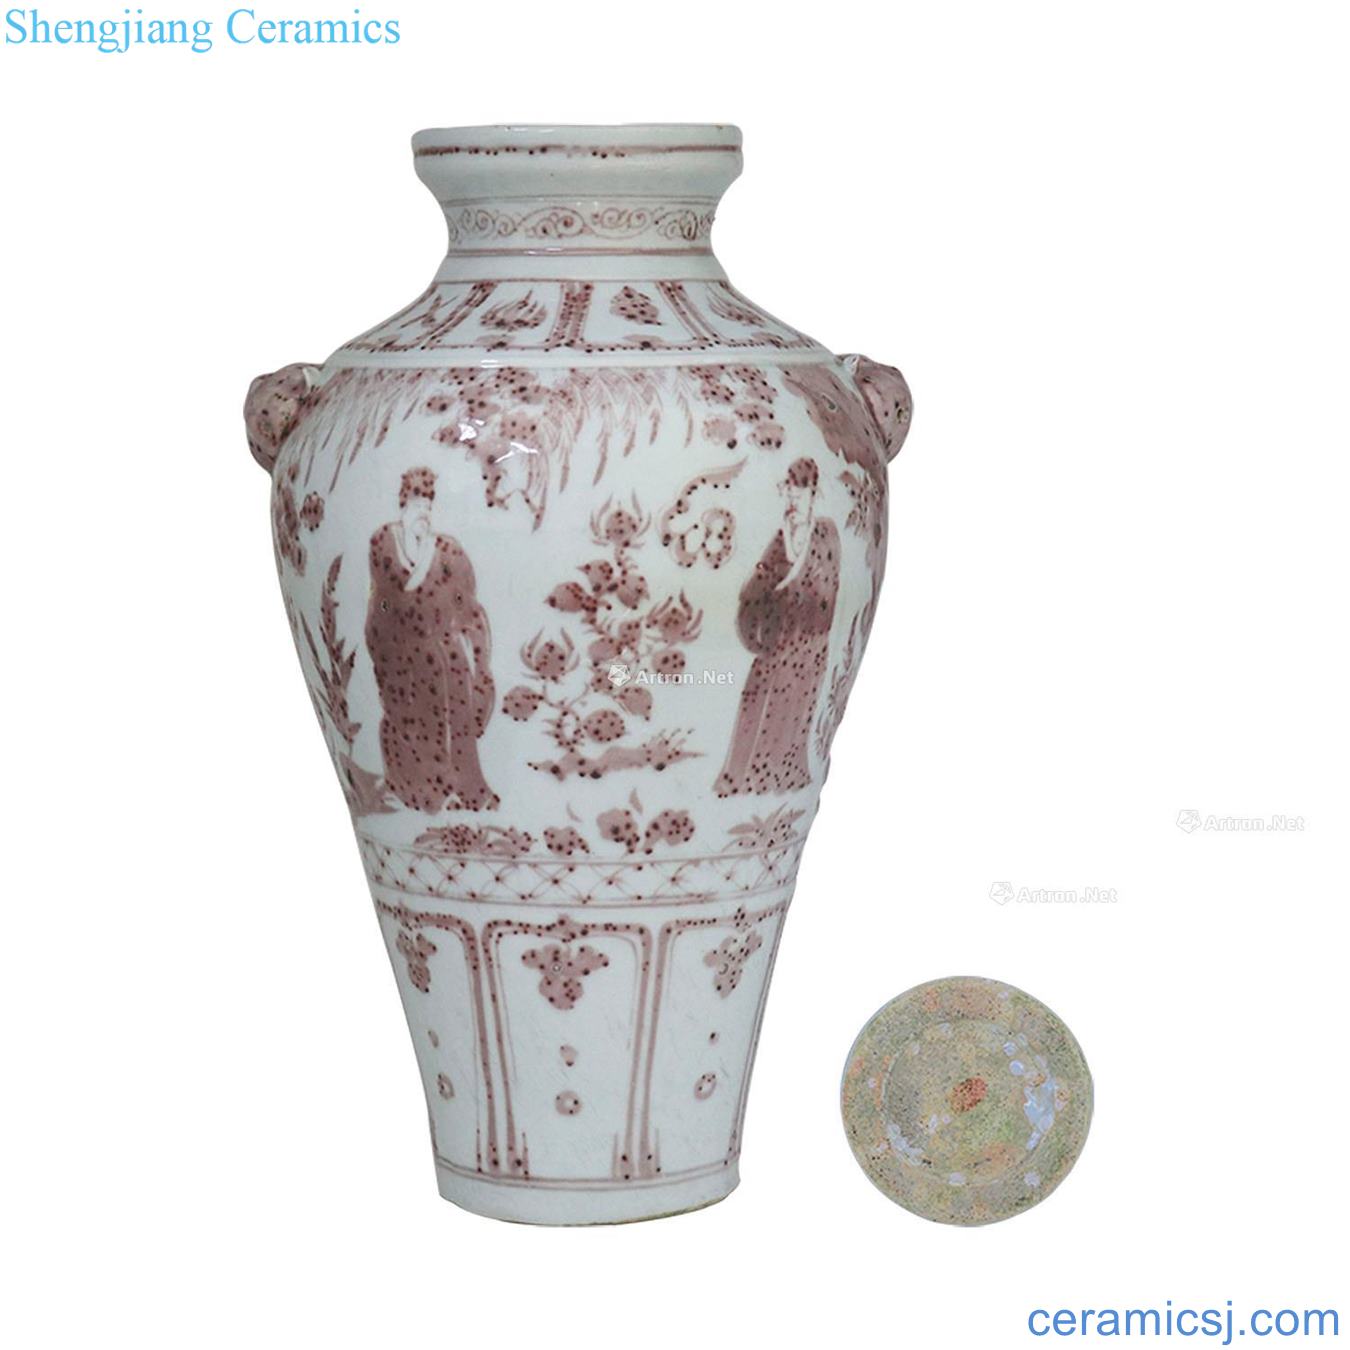 The yuan dynasty Youligong ears cans